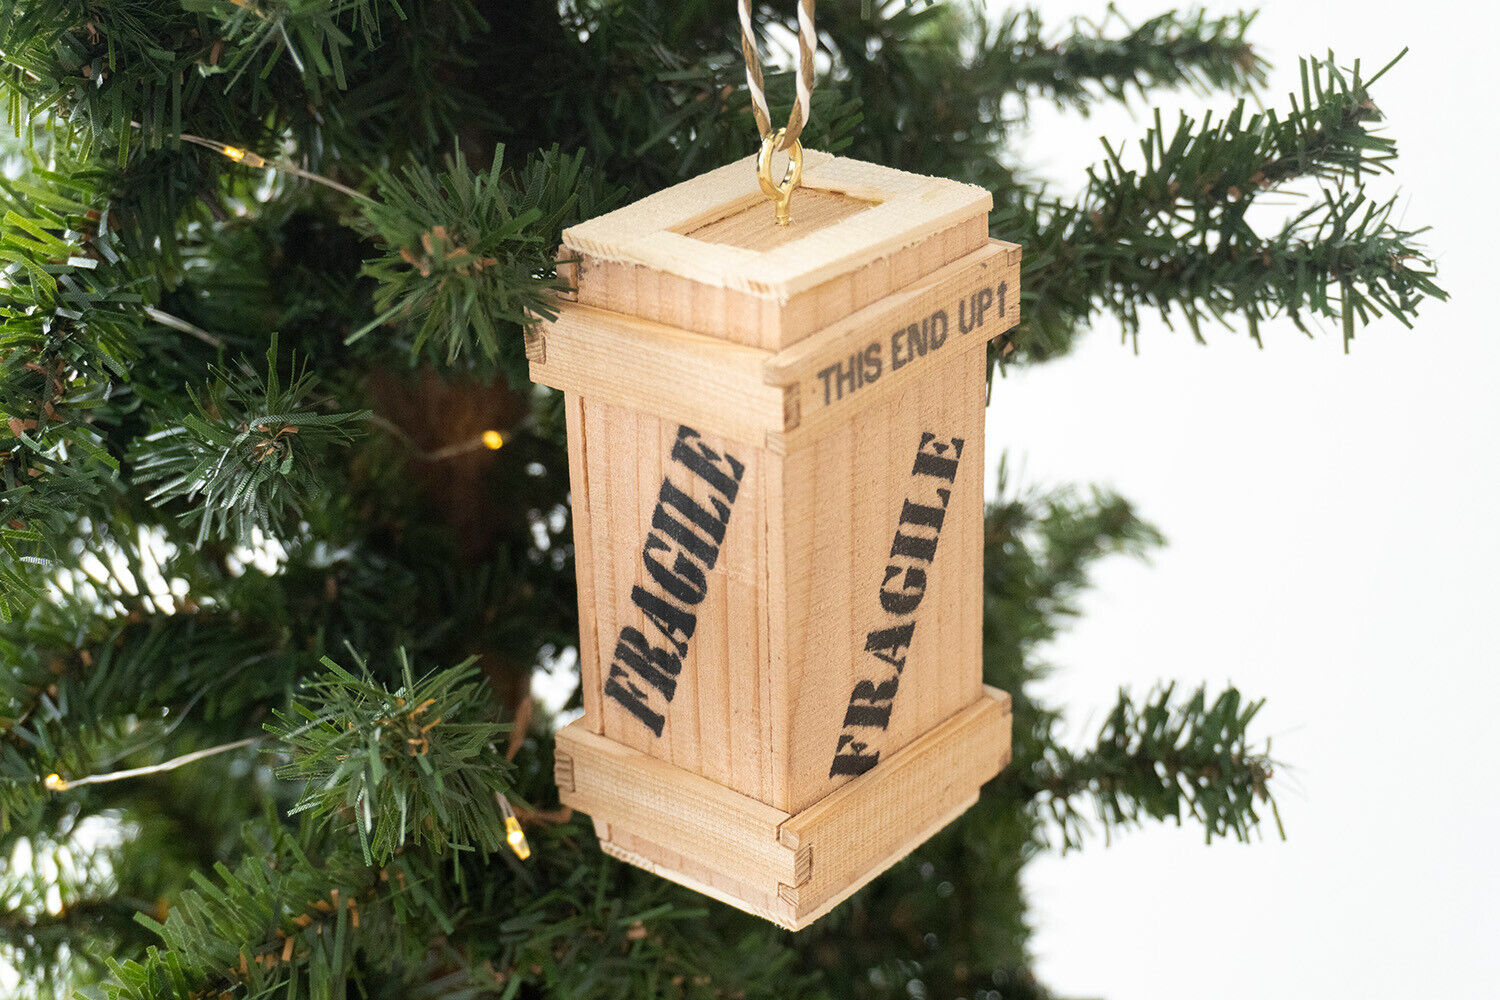 Fragile Real Wood Crate Ornament with Miniature Leg Lamp